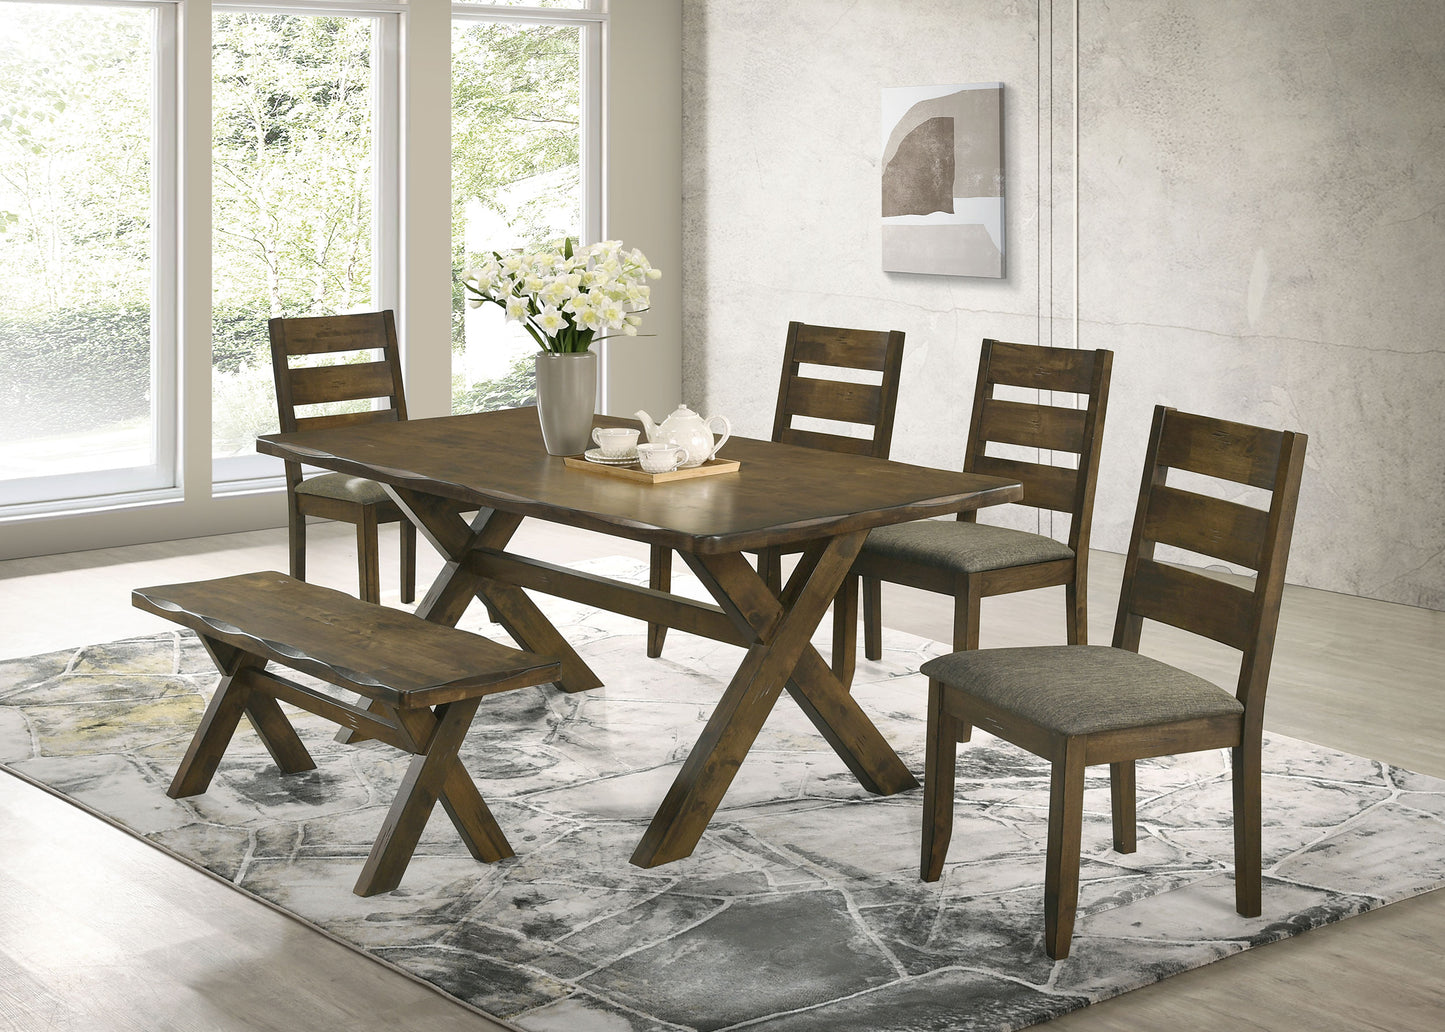 Alston Dining Room Set Knotty Nutmeg and Brown